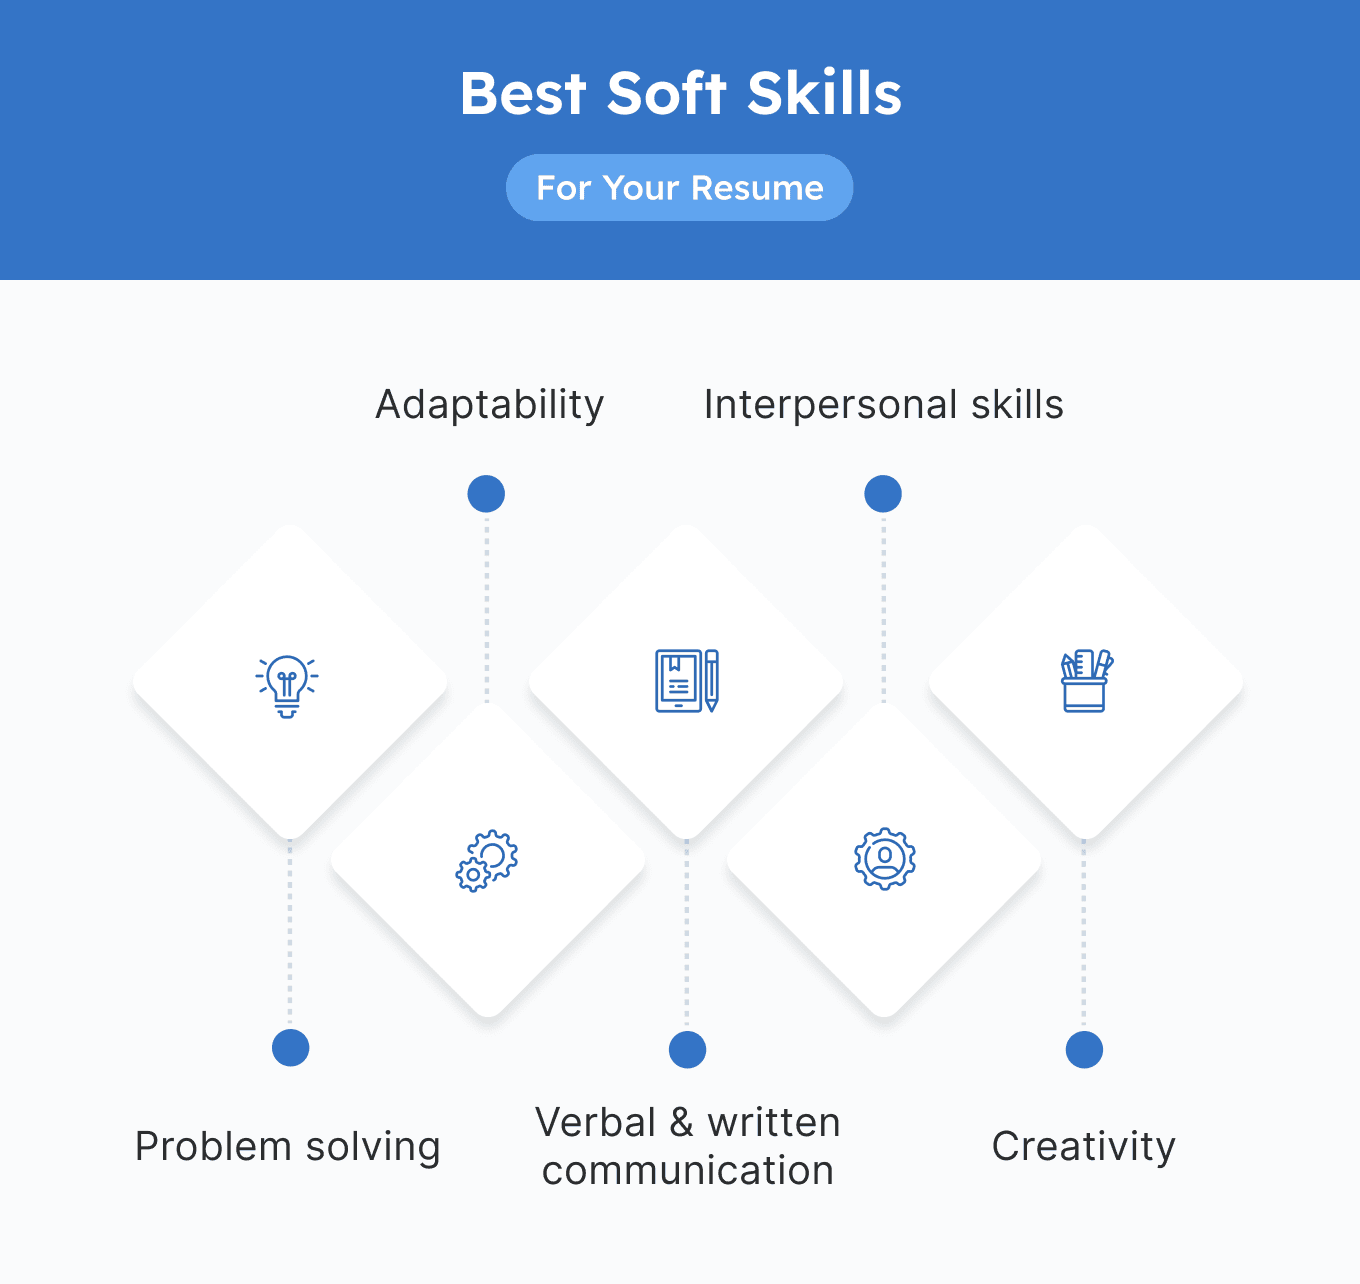 A graphic depicting the top 5 soft skills to include on your resume: Problem solving, adaptability, verbal and written communication, interpersonal skills, and creativity.